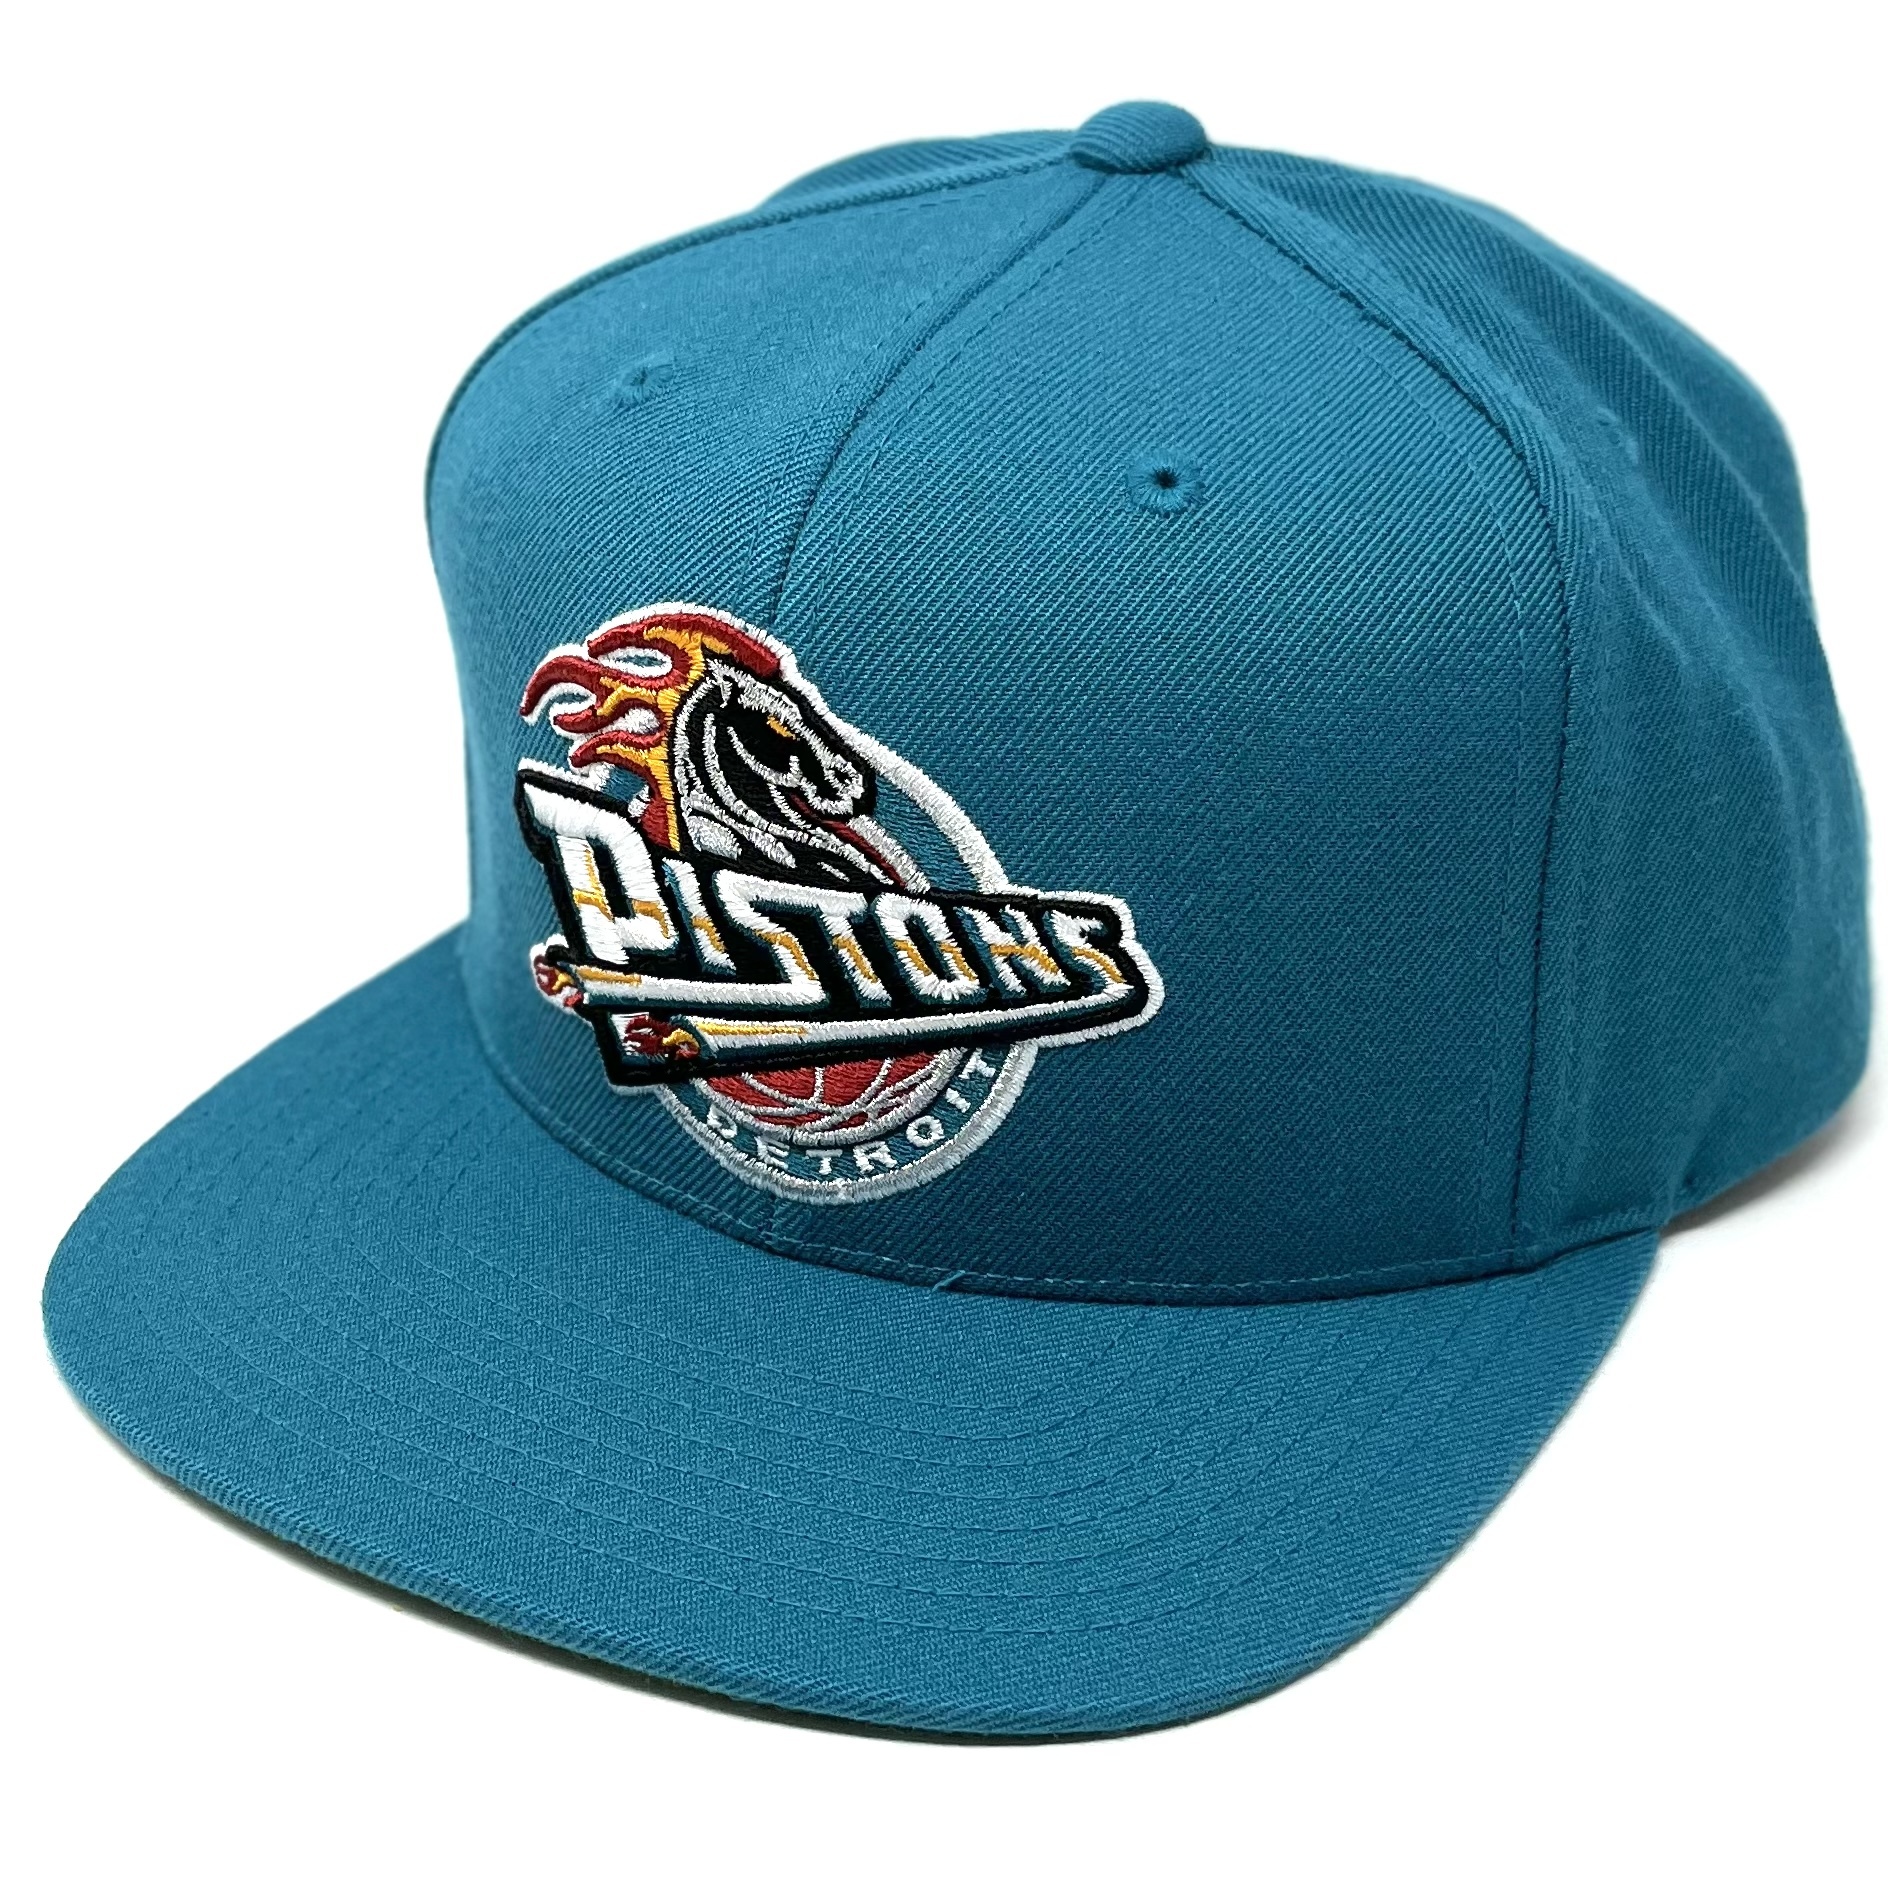 Mitchell & Ness Detroit Pistons Wool Solid Snapback - Blue